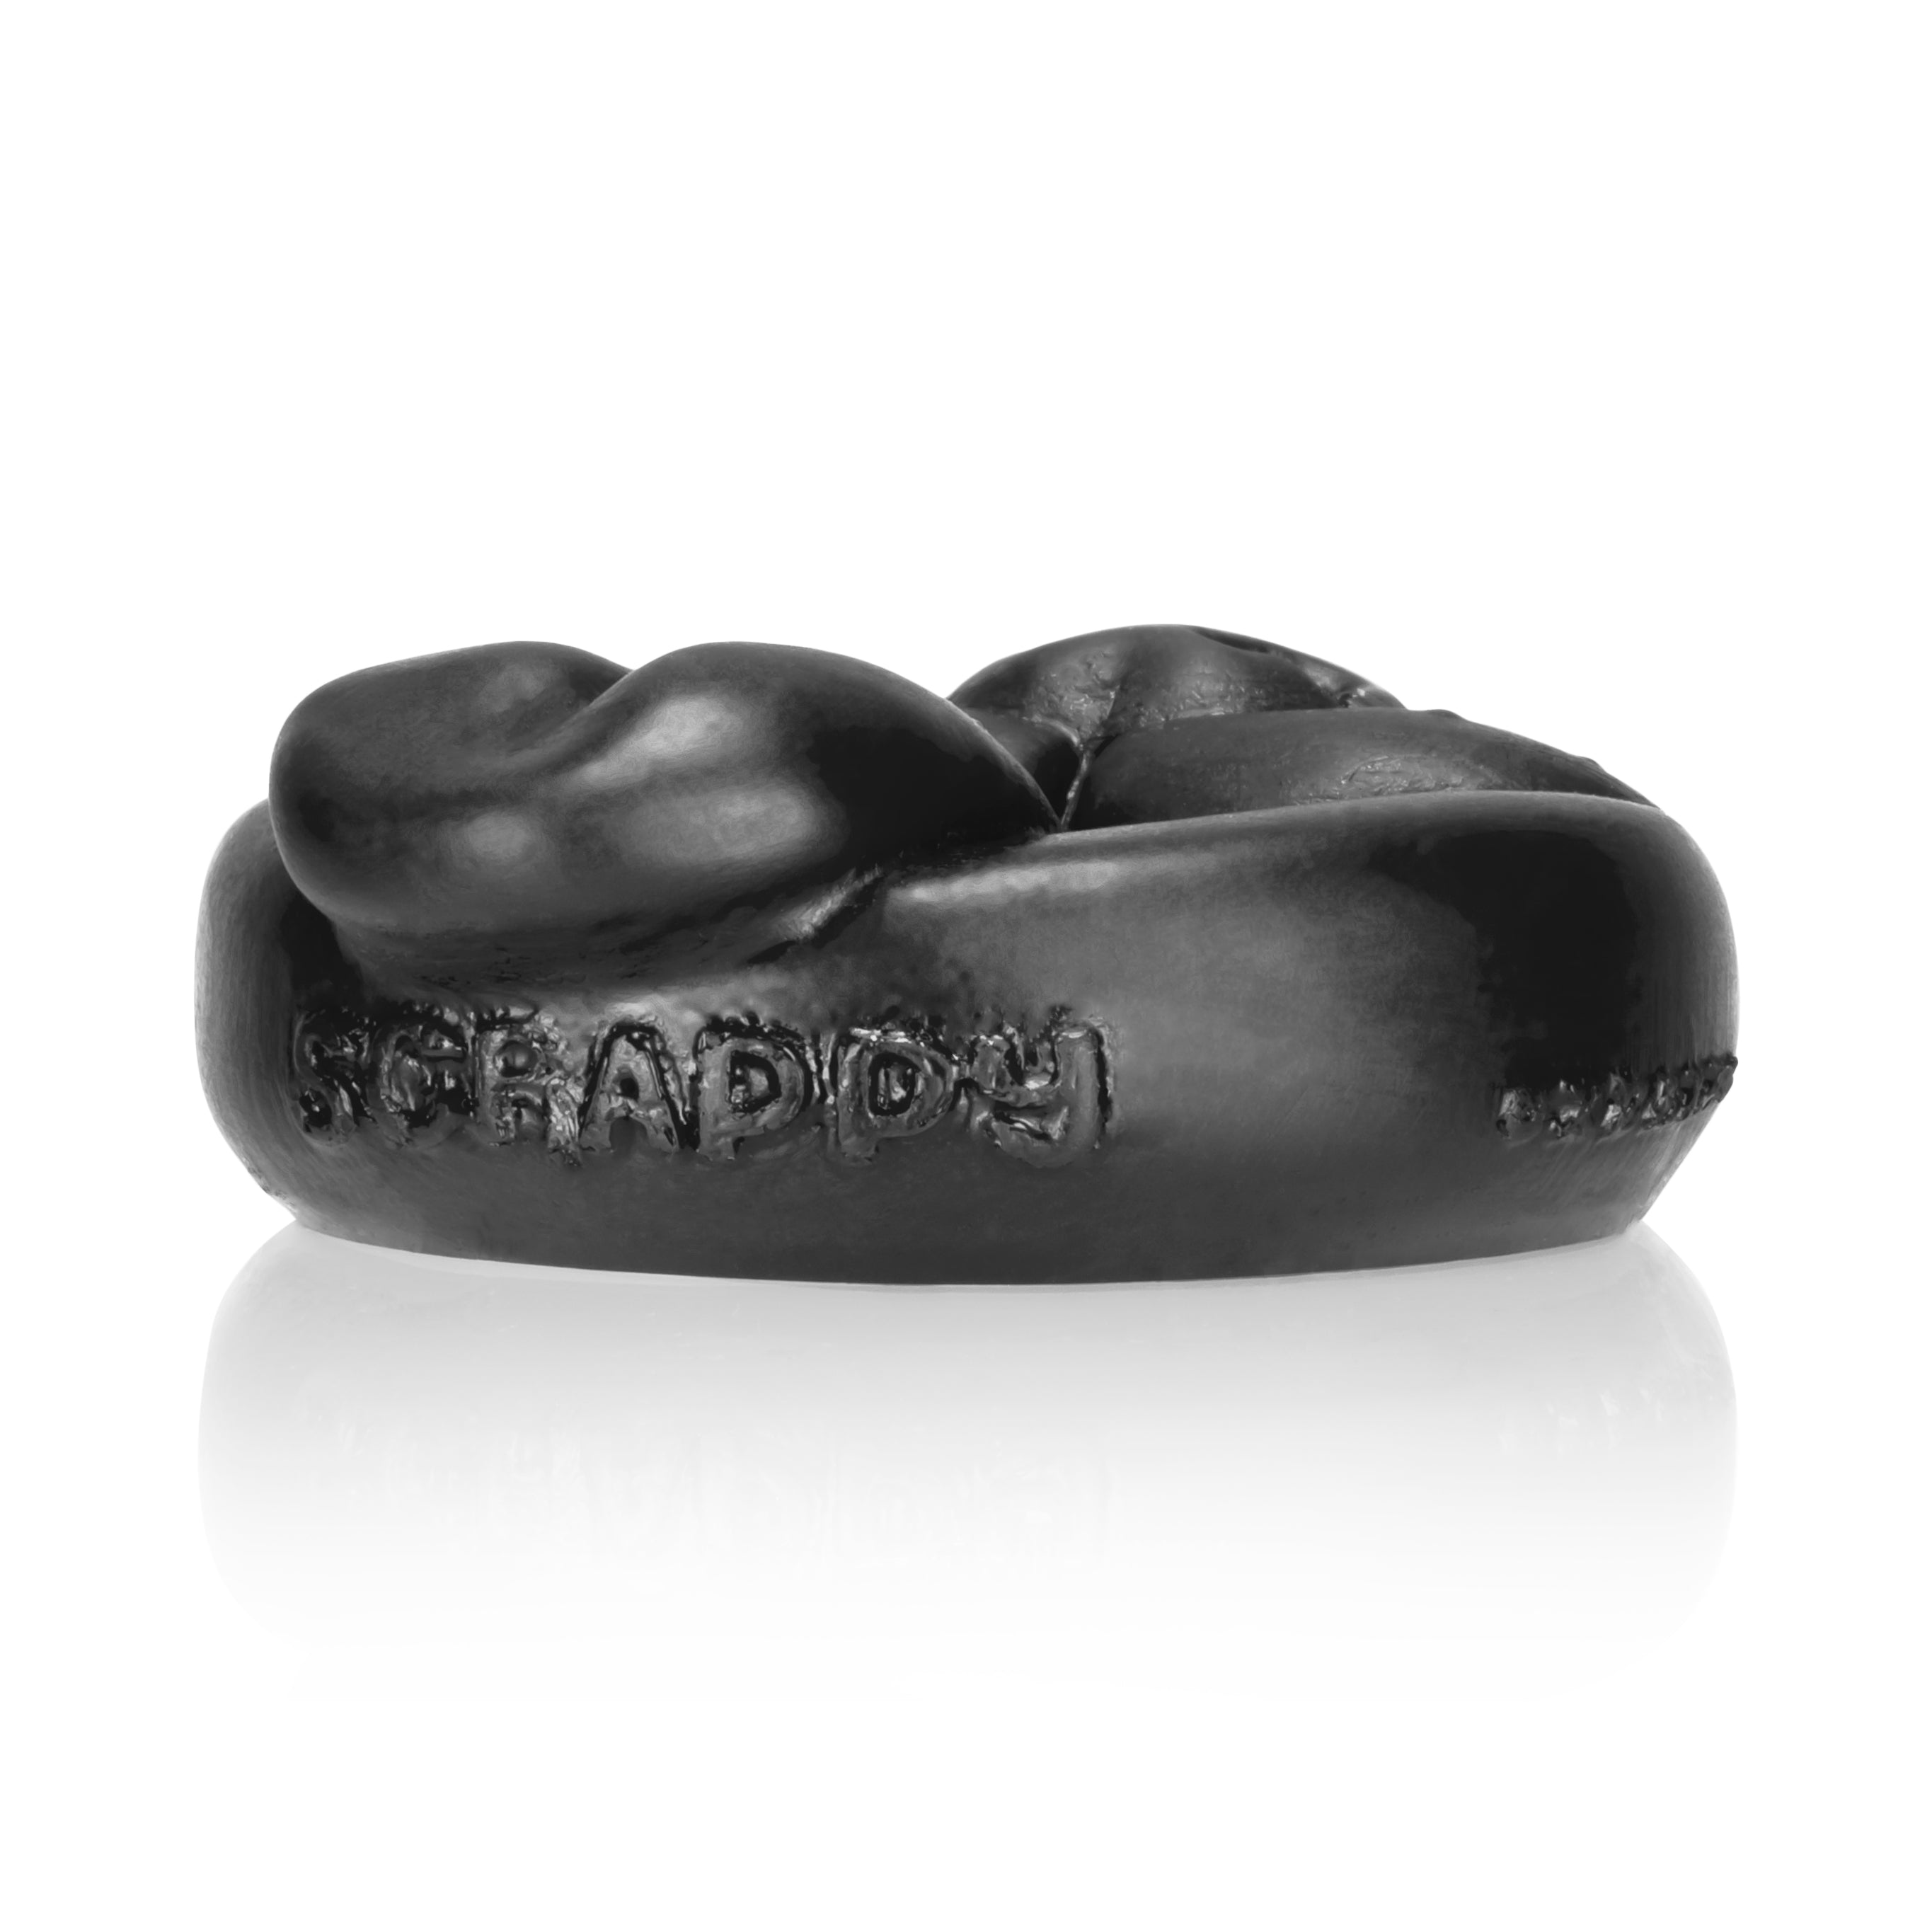 Oxballs Scrappy • Silicone Penis Ring